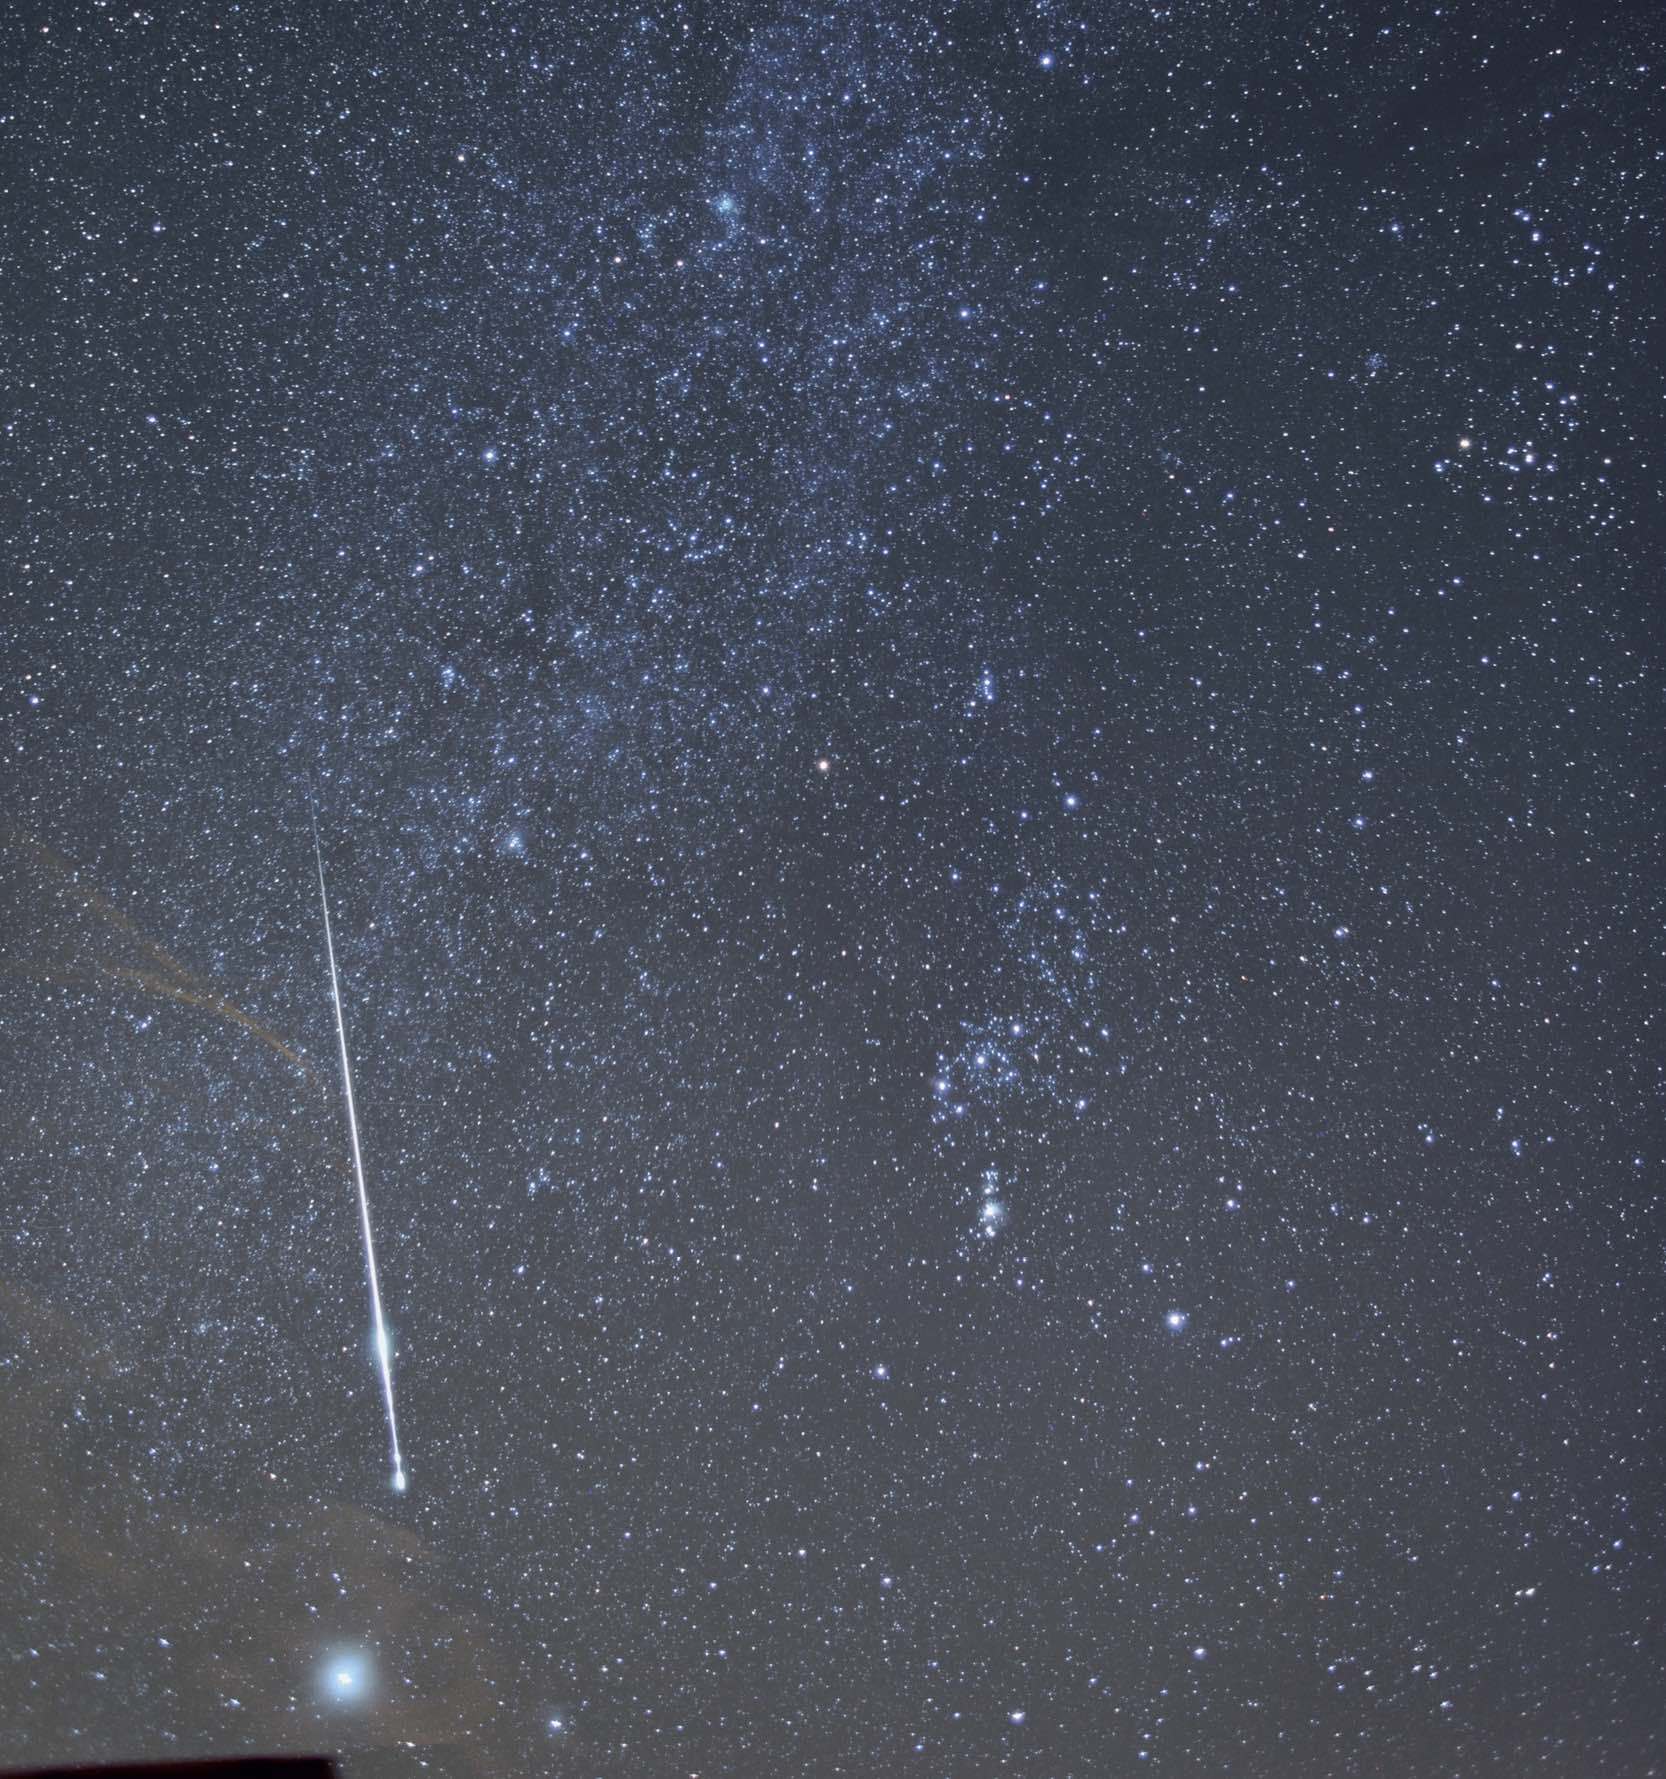 A very bright meteor in the constellation of Orion. It even left behind a small "smoke trail", which was still visible in the subsequent images in the series. Image data: Canon EOS 5D Mk II at ISO 800, 24mm focal length and f/2.2 aperture M. Weigand